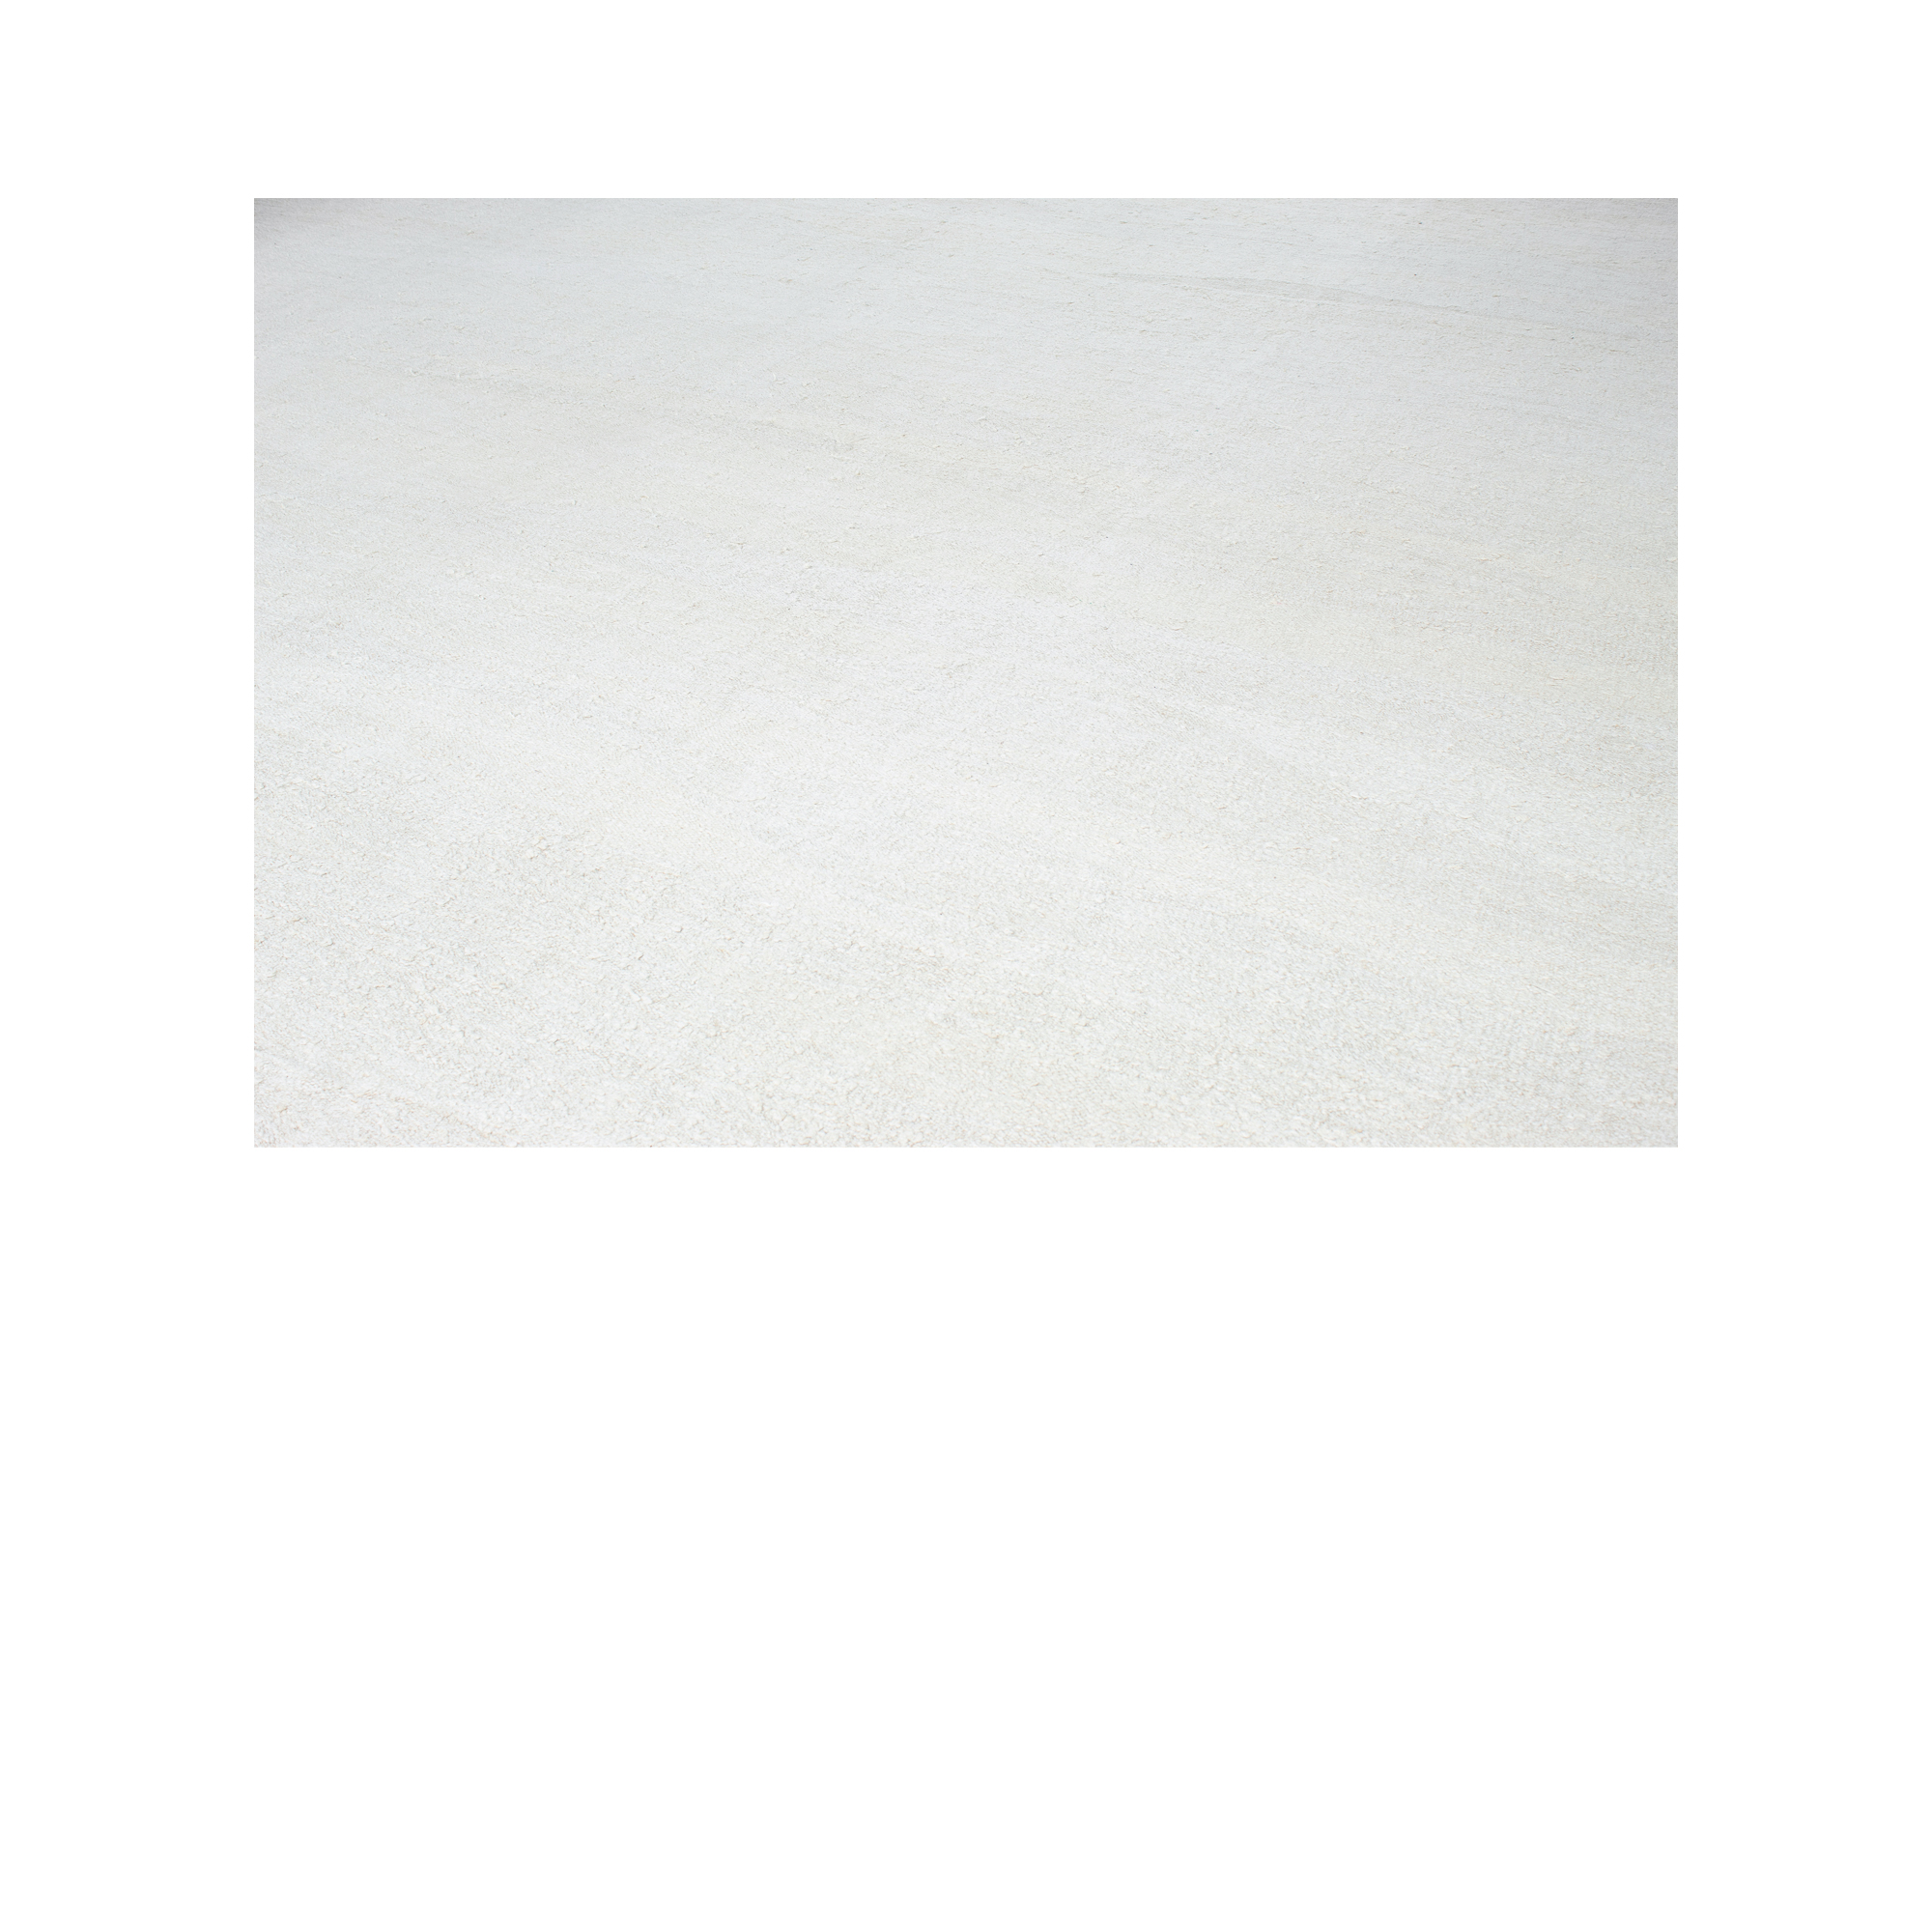 Plain rug is a modern, simplistic piece made from 100% recycled hemp. 